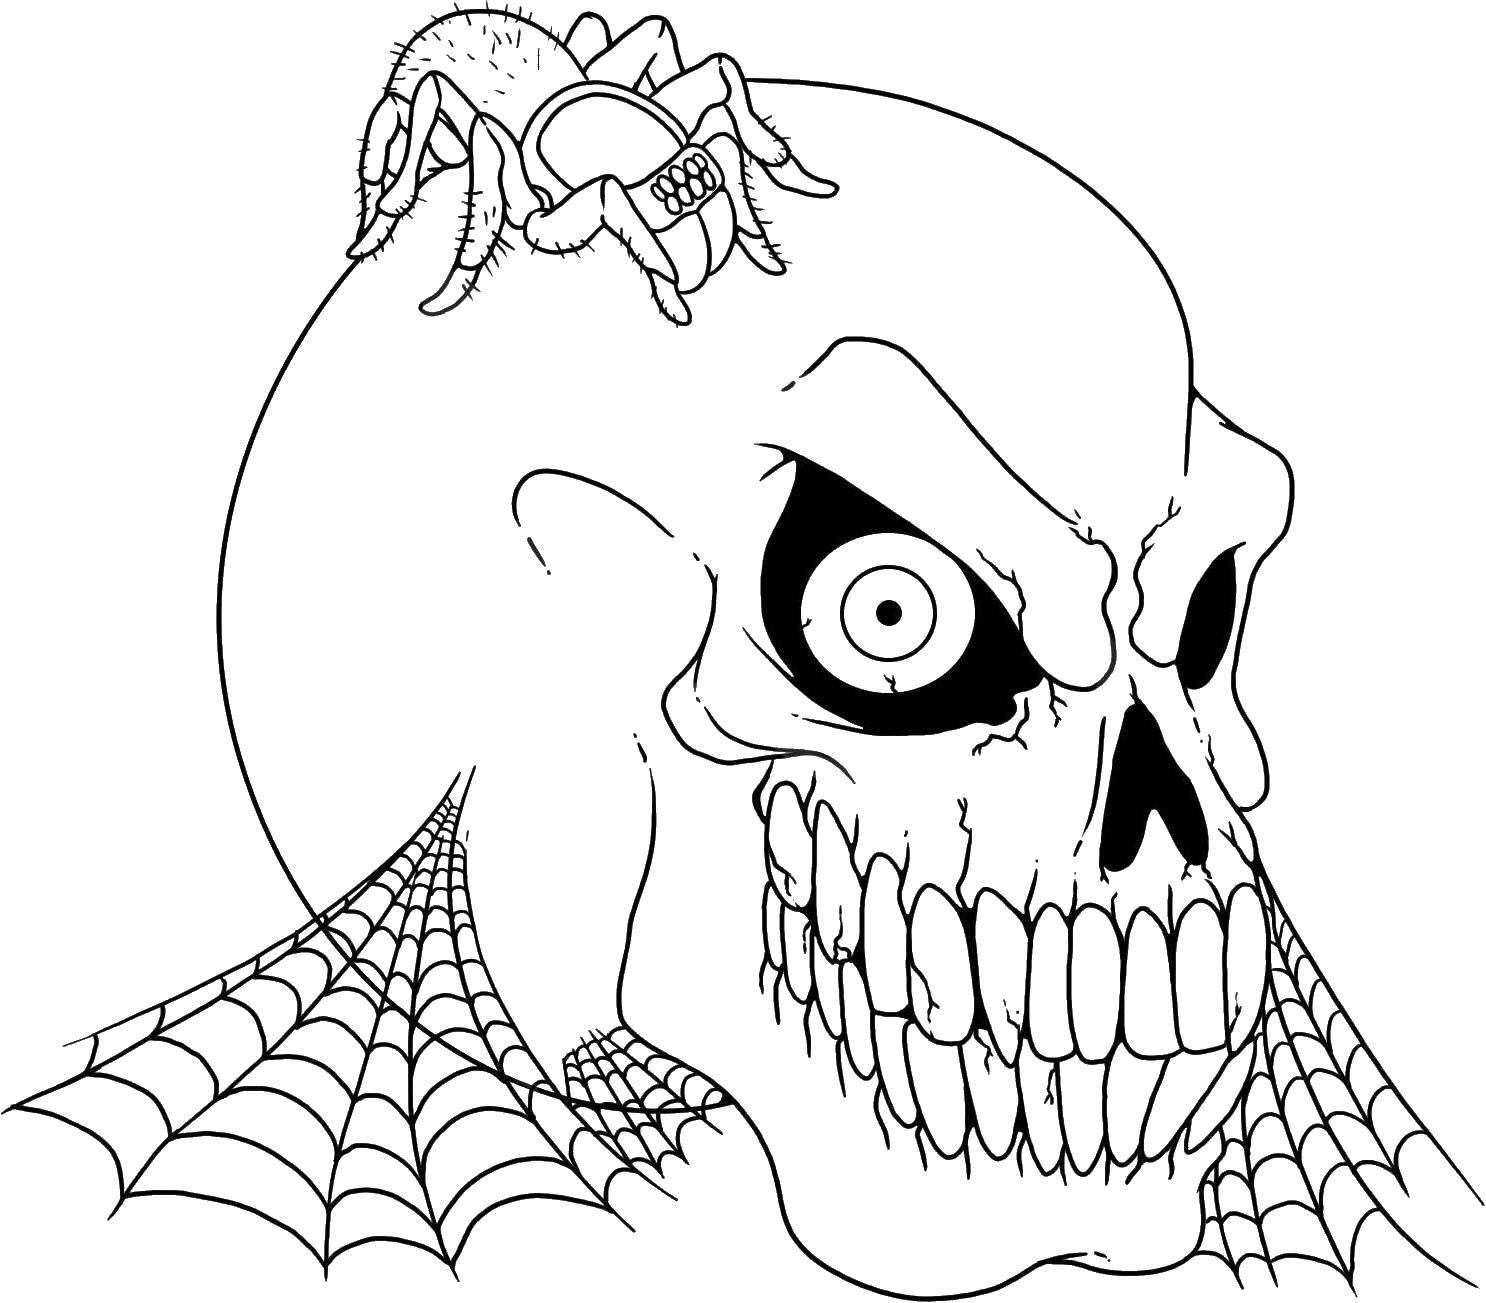 Coloring Skull in spider web and spider. Category skull. Tags:  skulls, spiders, cobwebs.